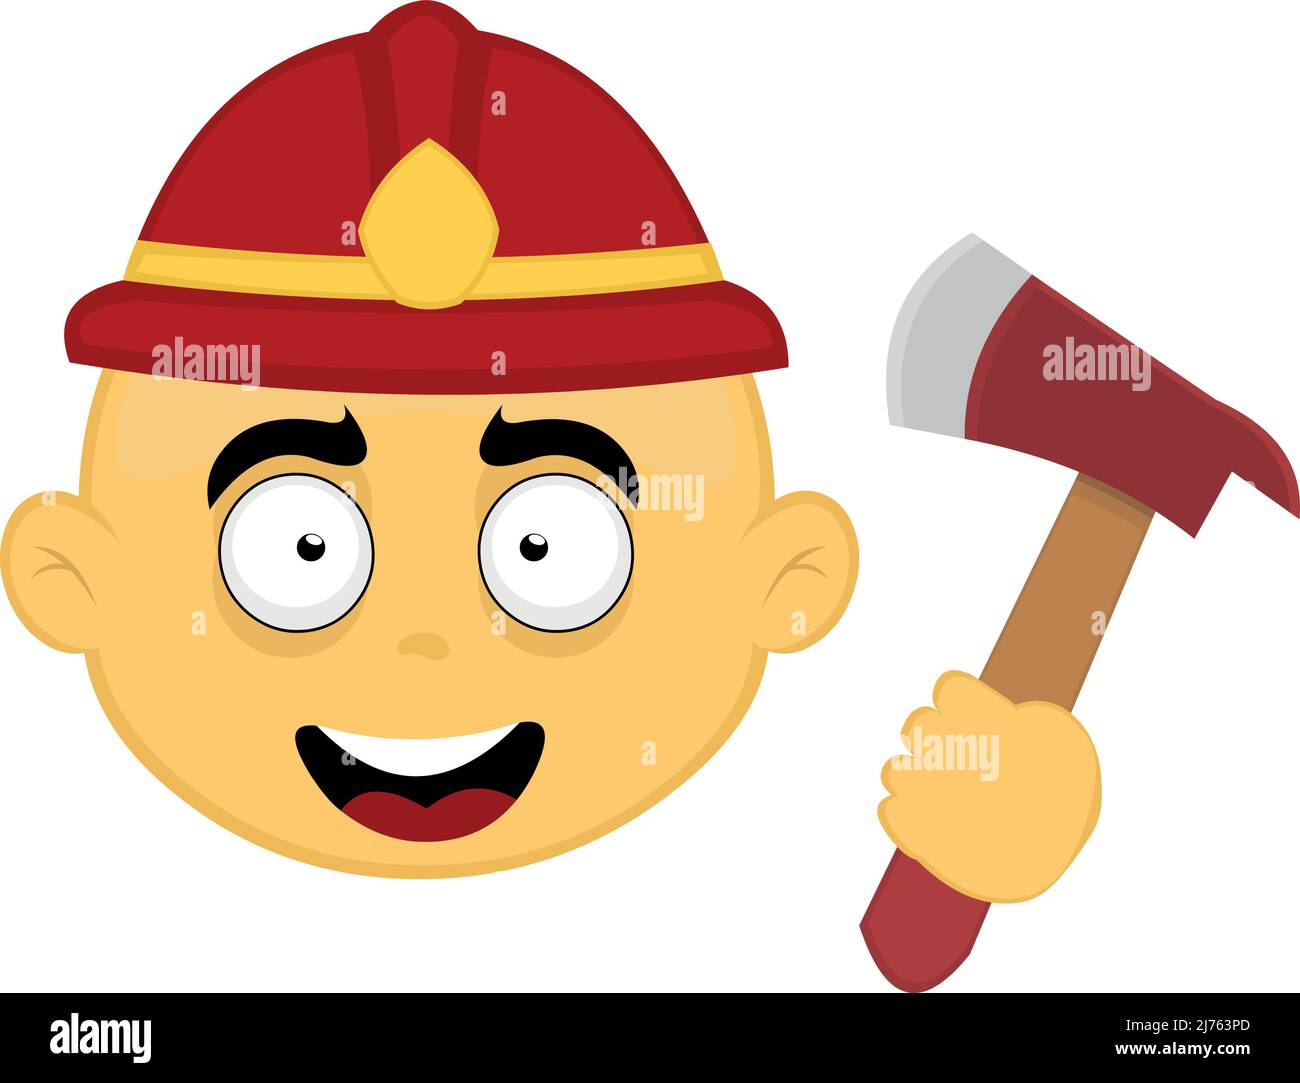 Vector illustration of the face of a yellow cartoon character with a firefighter helmet on his head and an ax in his hand Stock Vector